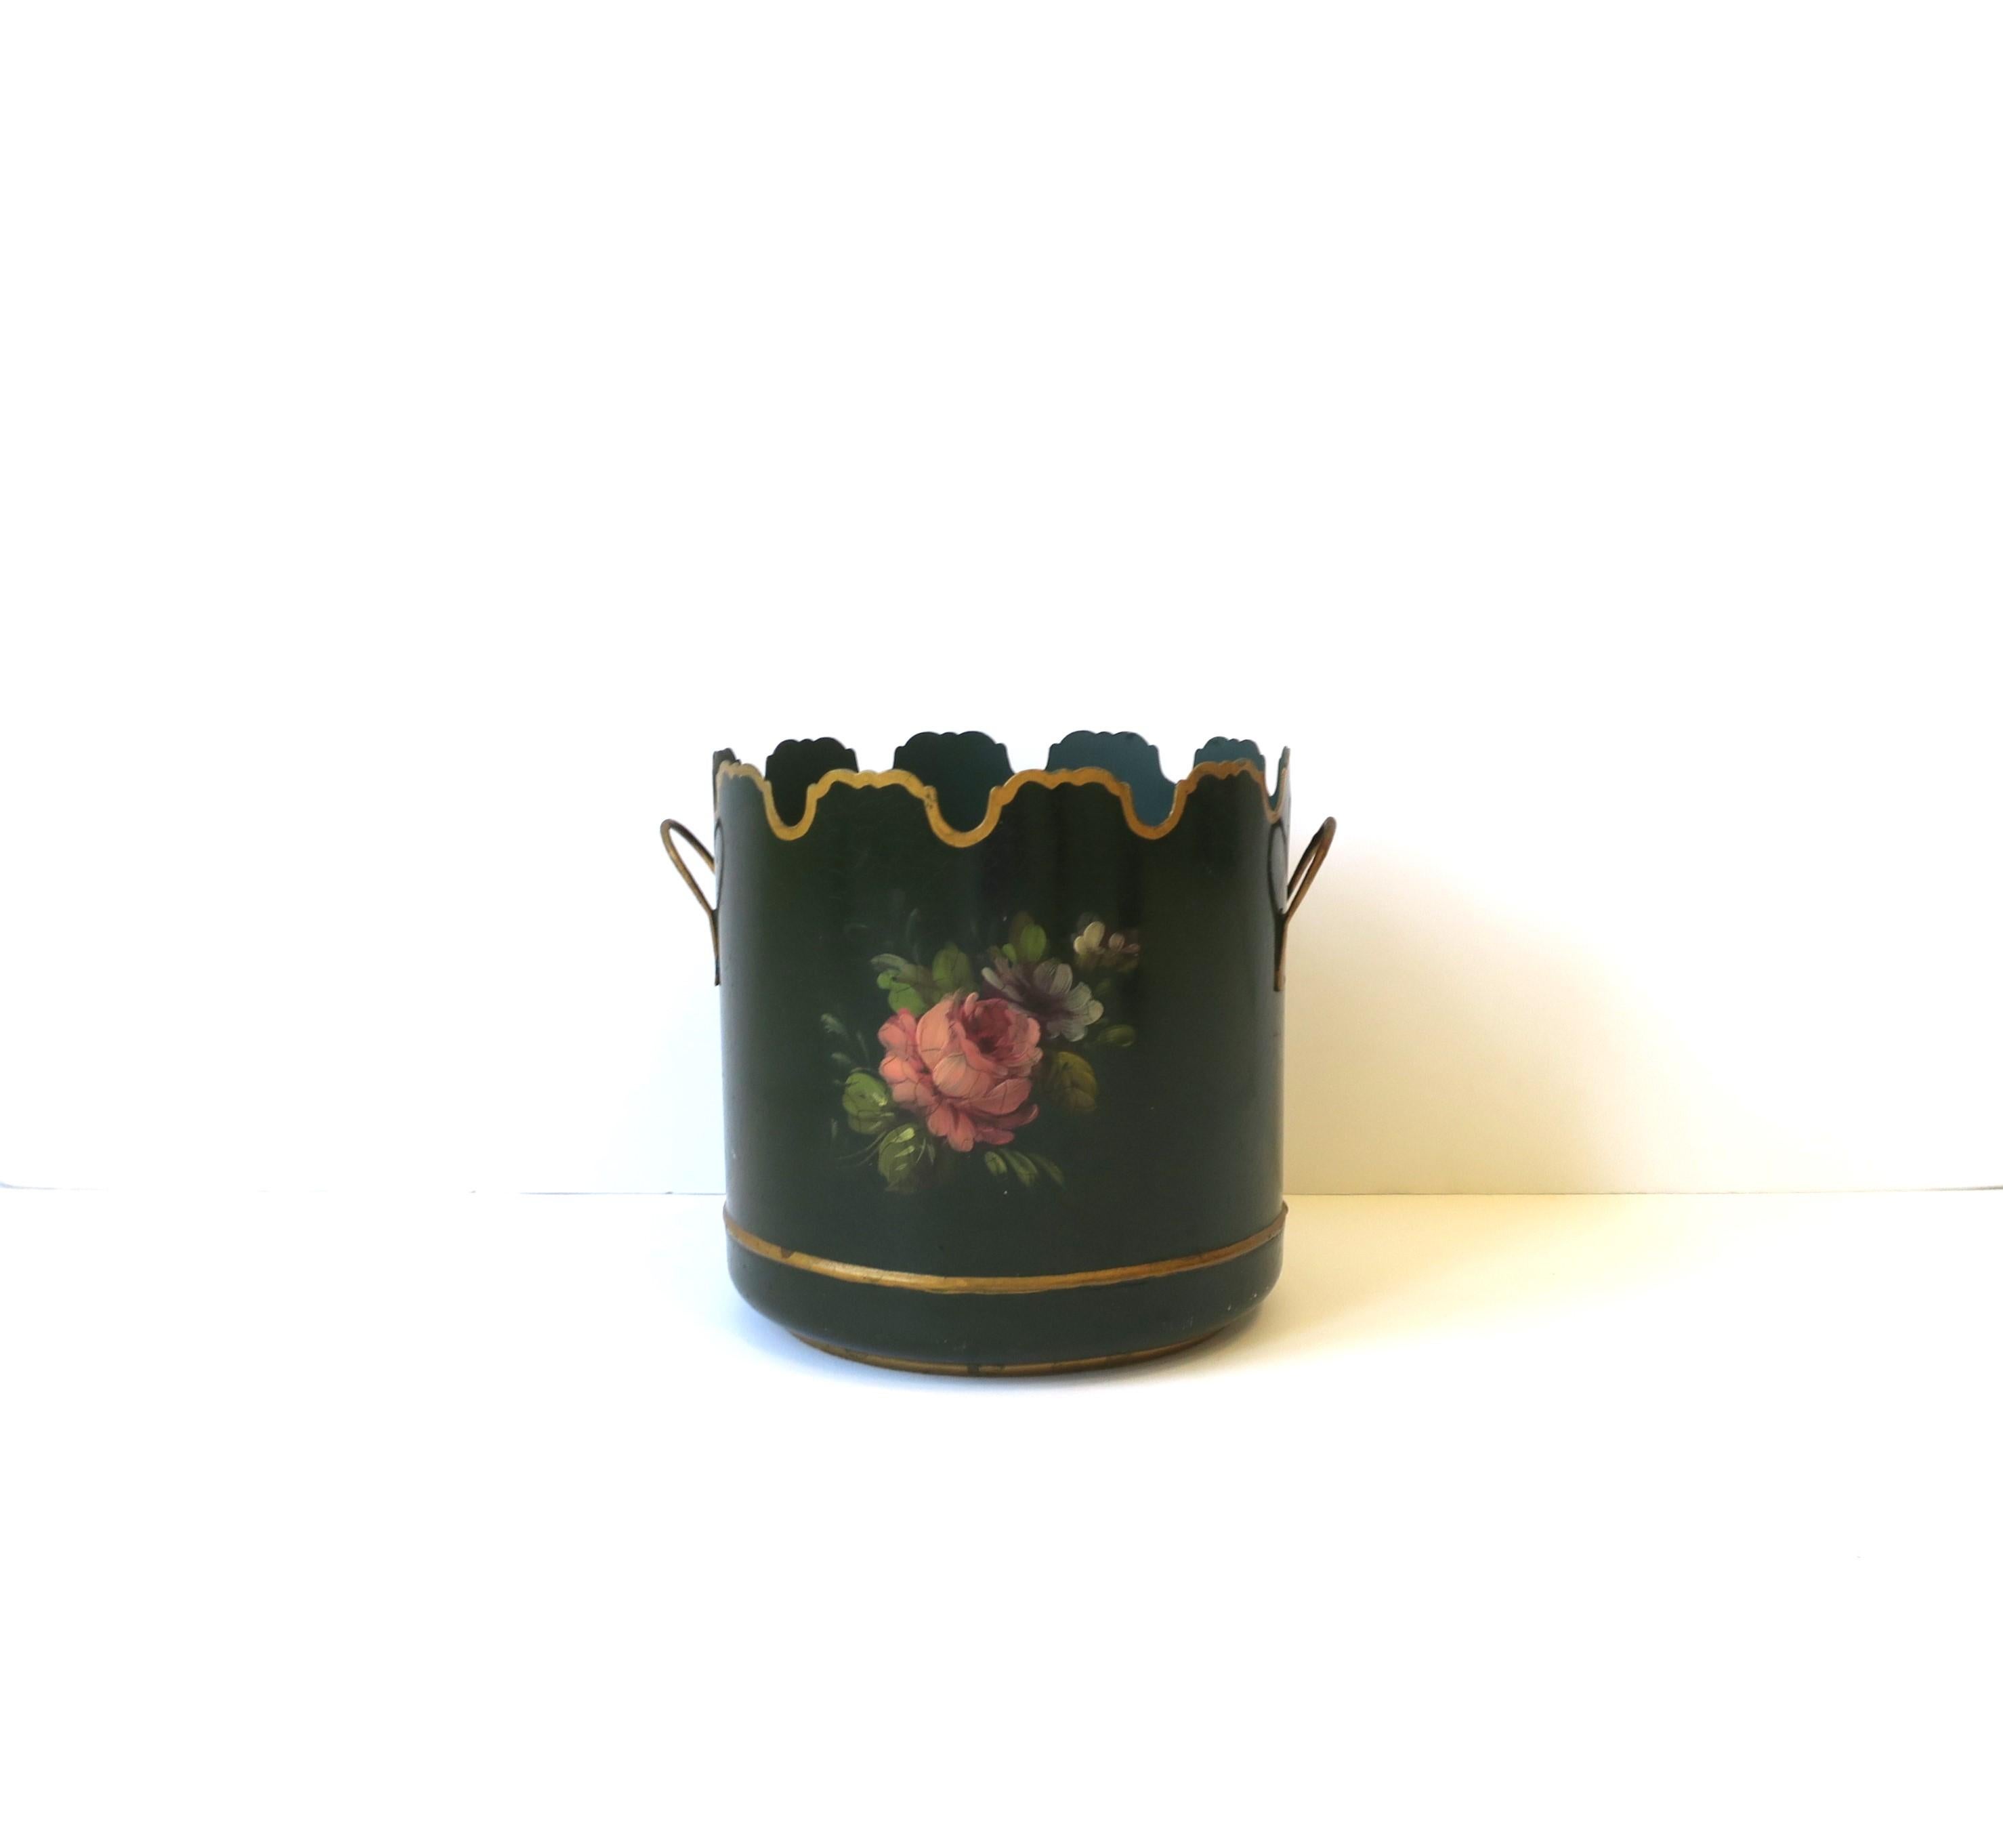 French Tôle Green & Gold Jardinière Cachepot with Scalloped Edge, 20th c France For Sale 5